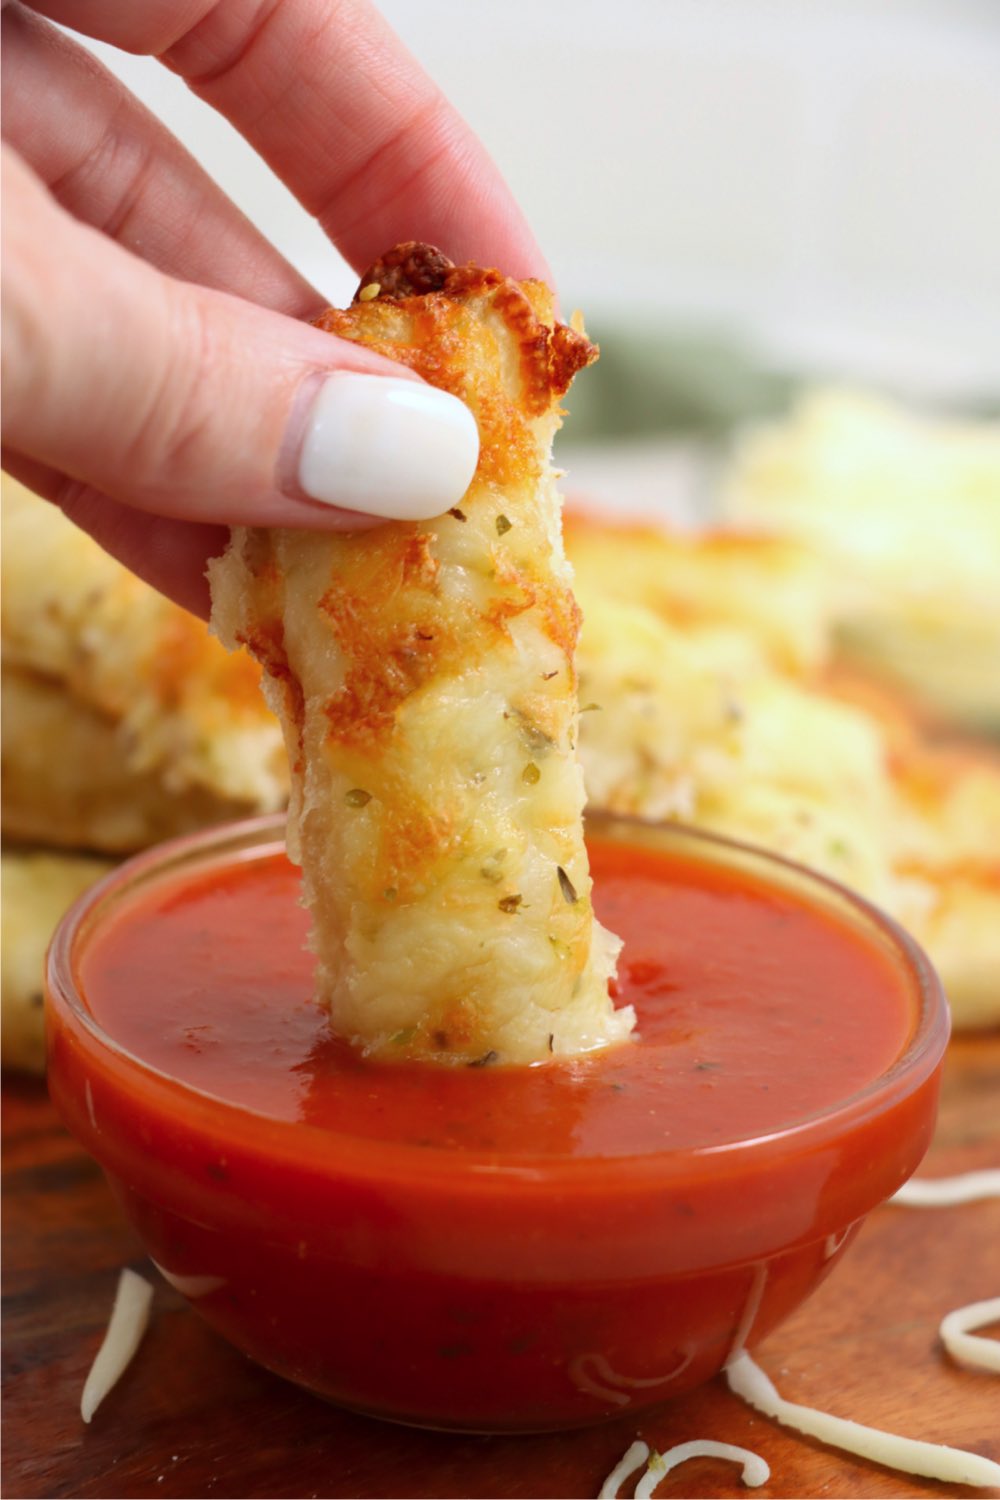 dunking a cheesy breadstick into a bowl of marinara sauce